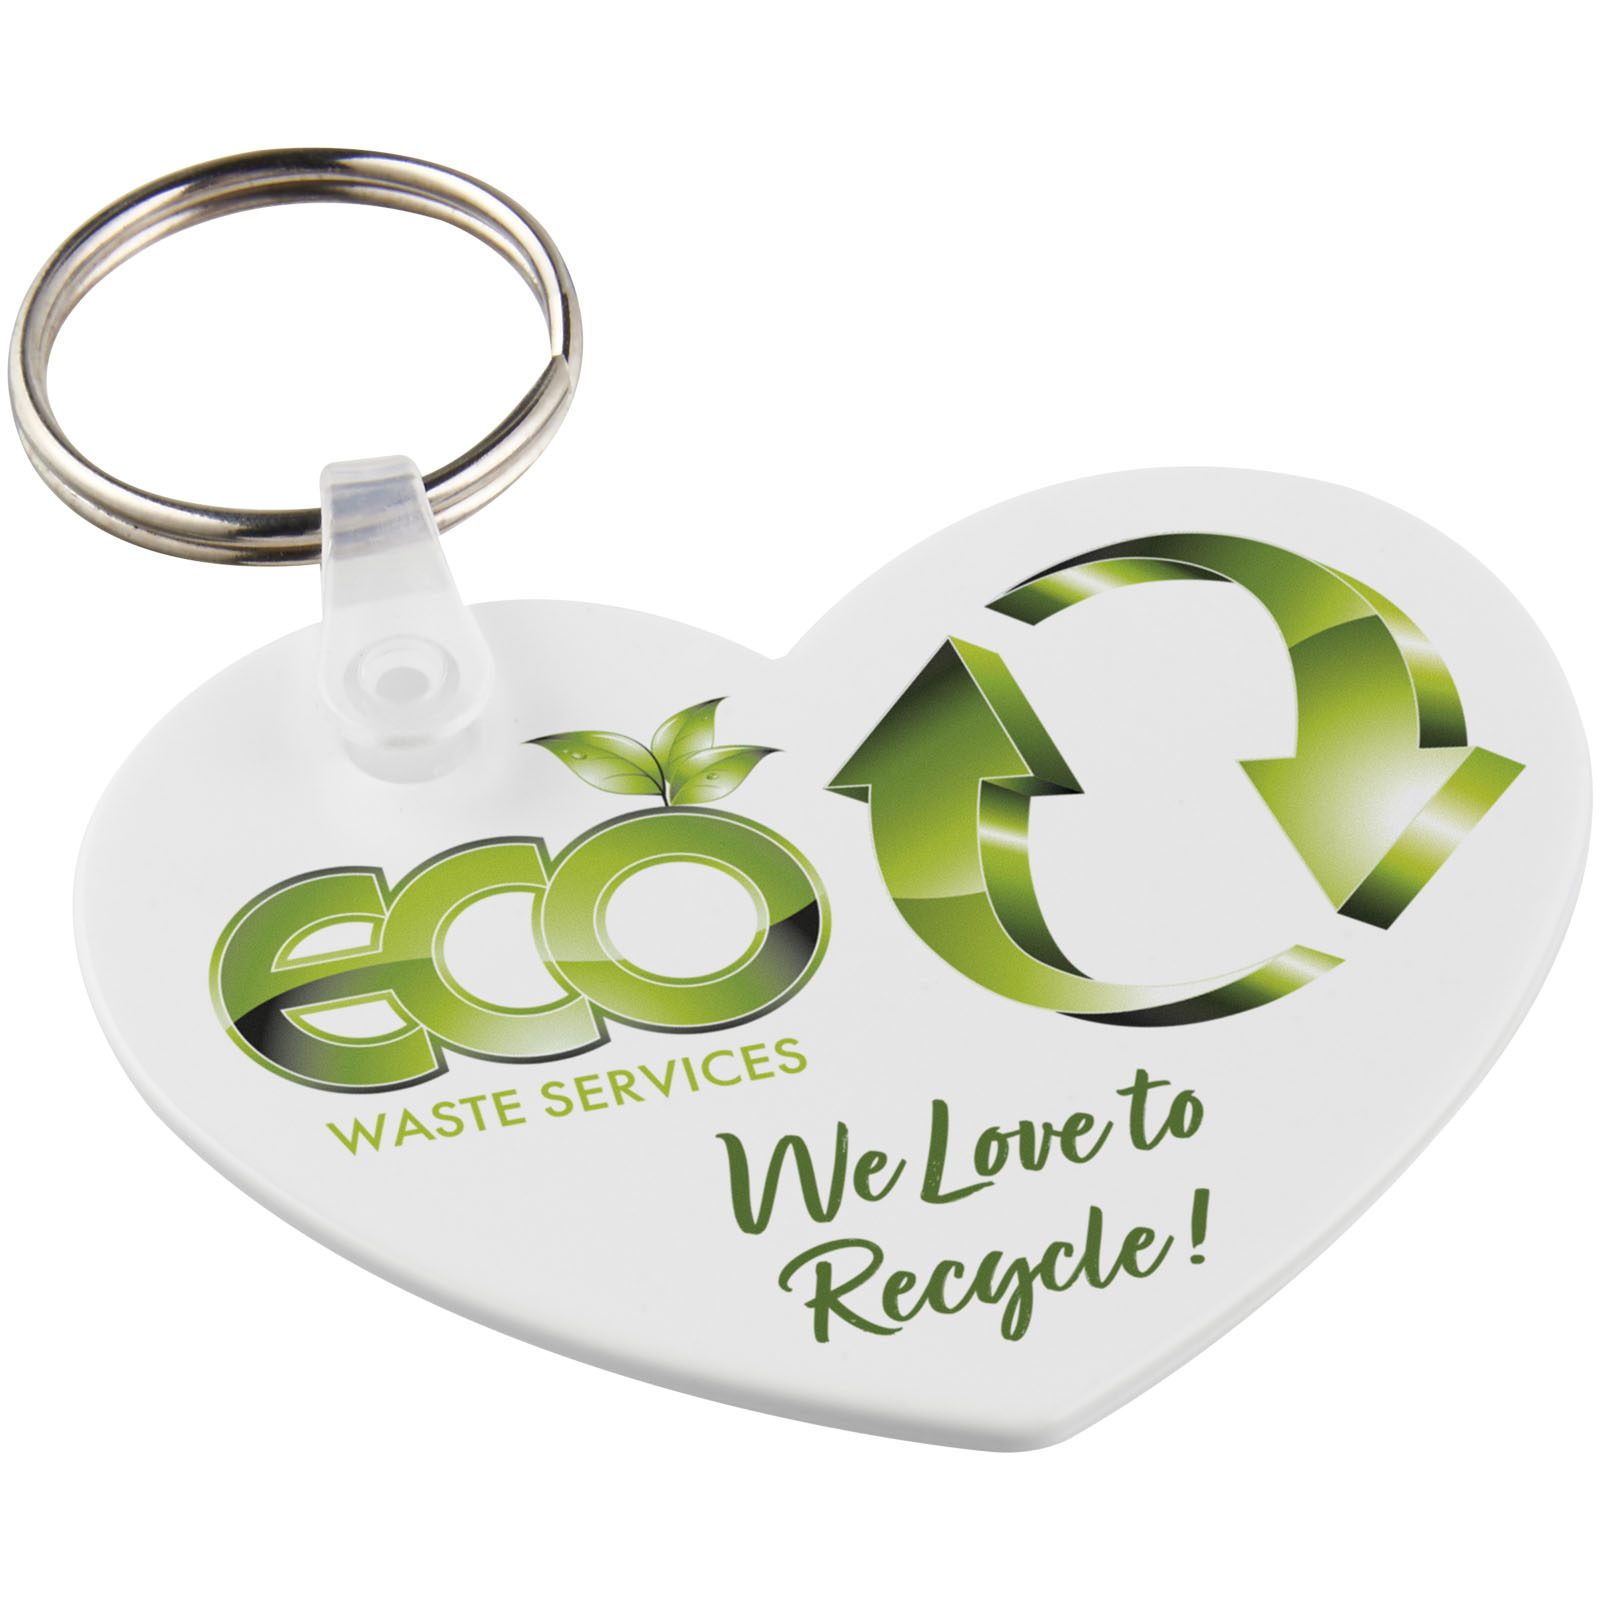 Advertising Keychains & Keyrings - Tait heart-shaped recycled keychain - 0